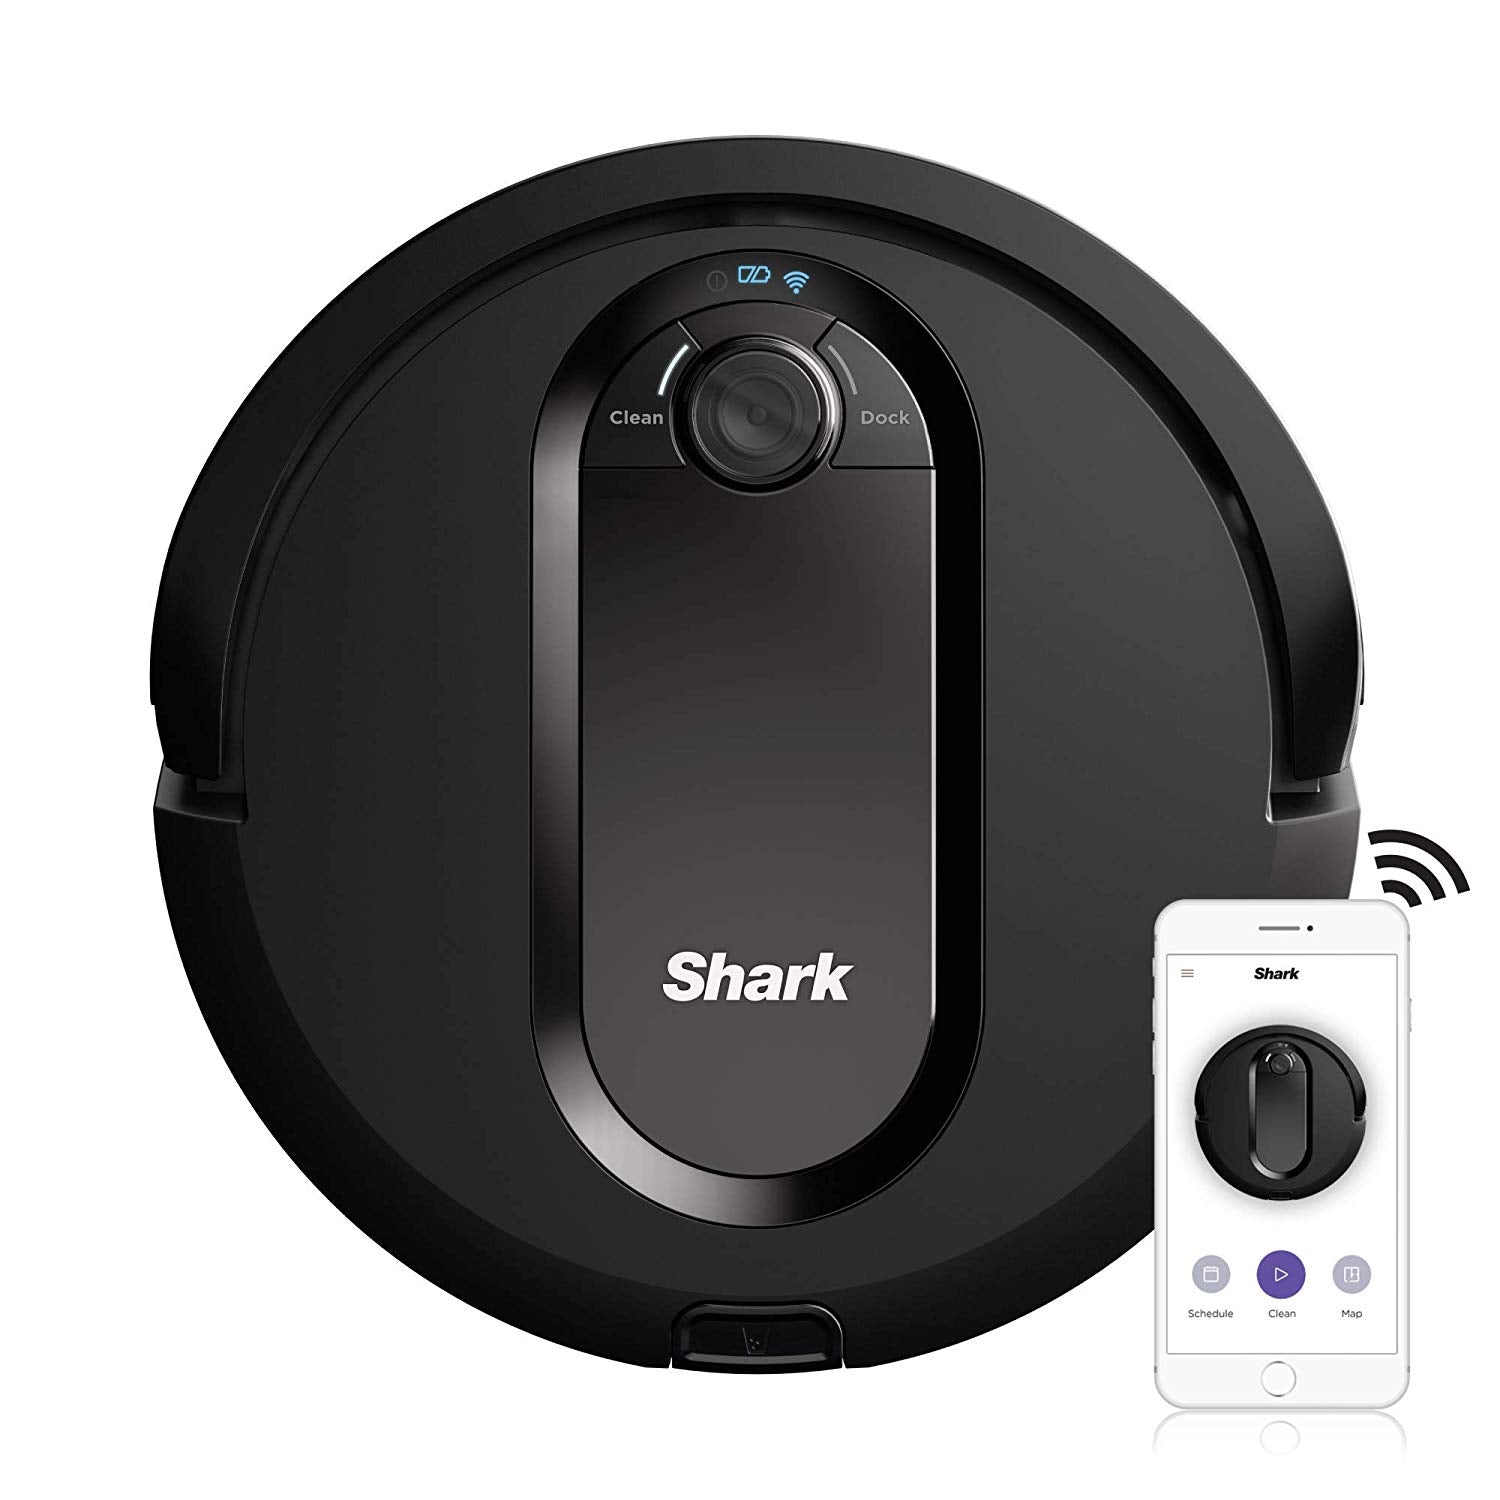 Shark IQ RV1001 Home Mapping Robot Vacuum Without Auto-Empty Dock - Black (Refurbished)